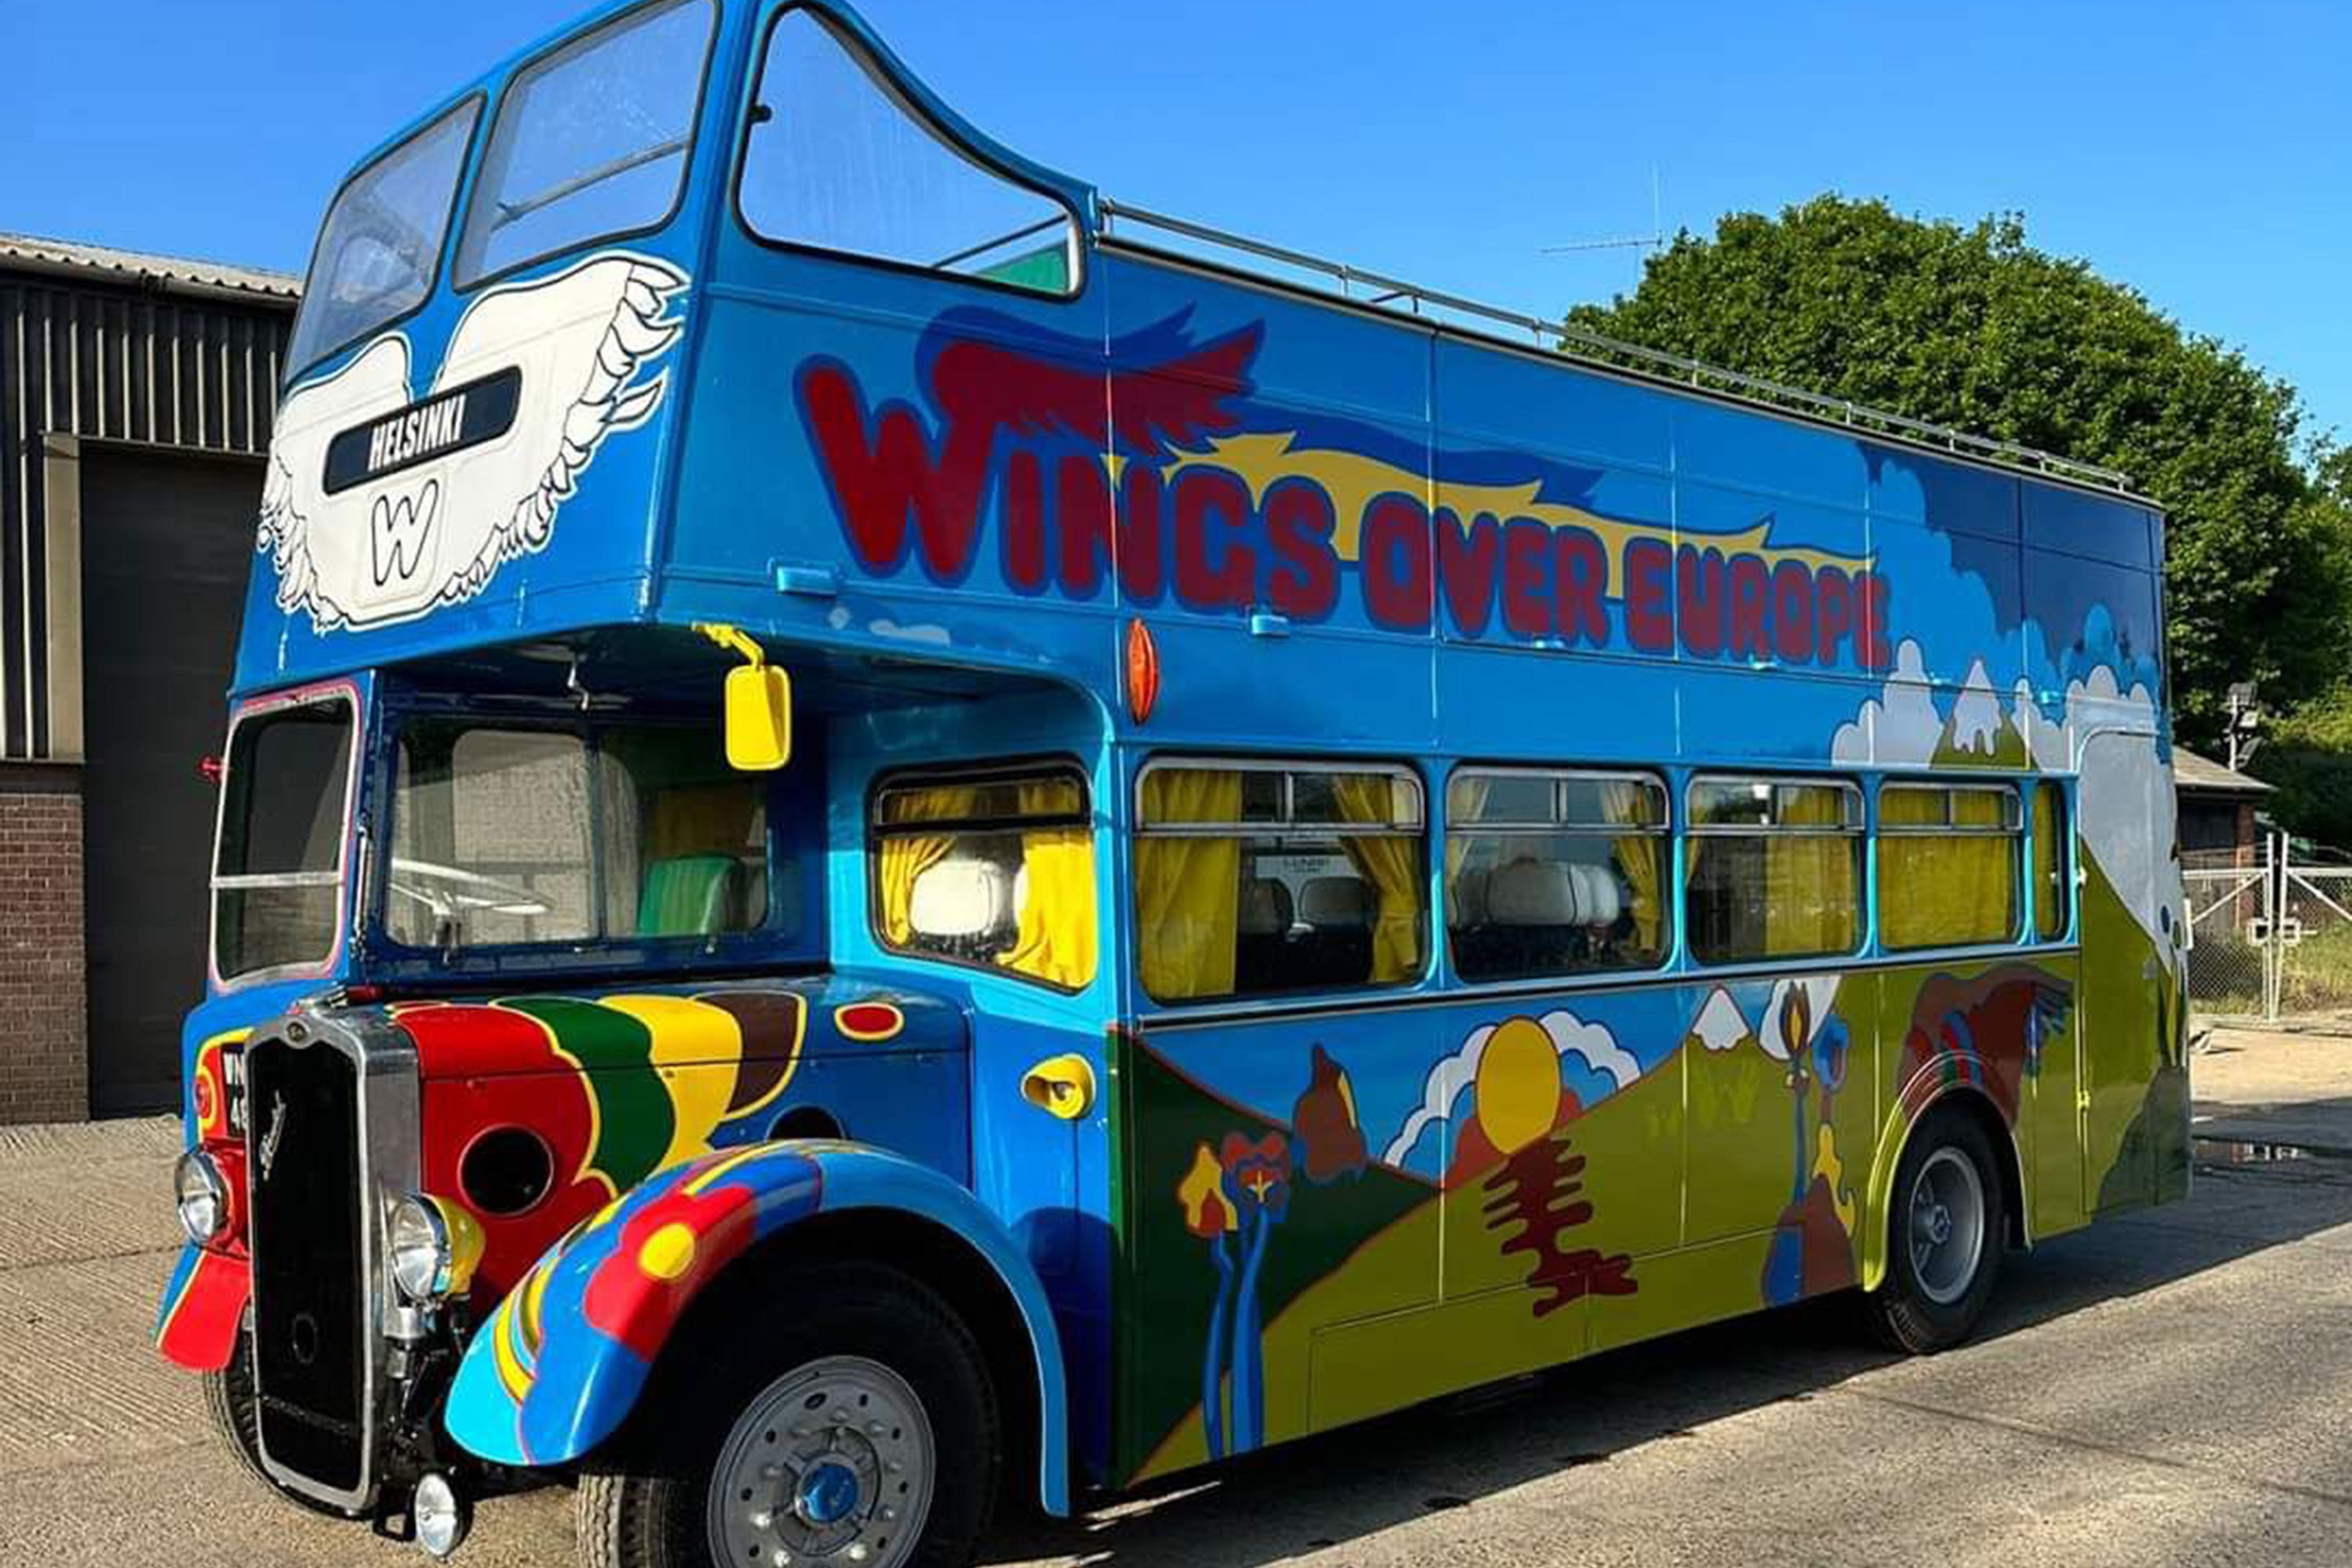 The bus is painted with psychedelic artwork, designed after The Beatles’ Yellow Submarine album cover (Julien’s Auctions/PA)